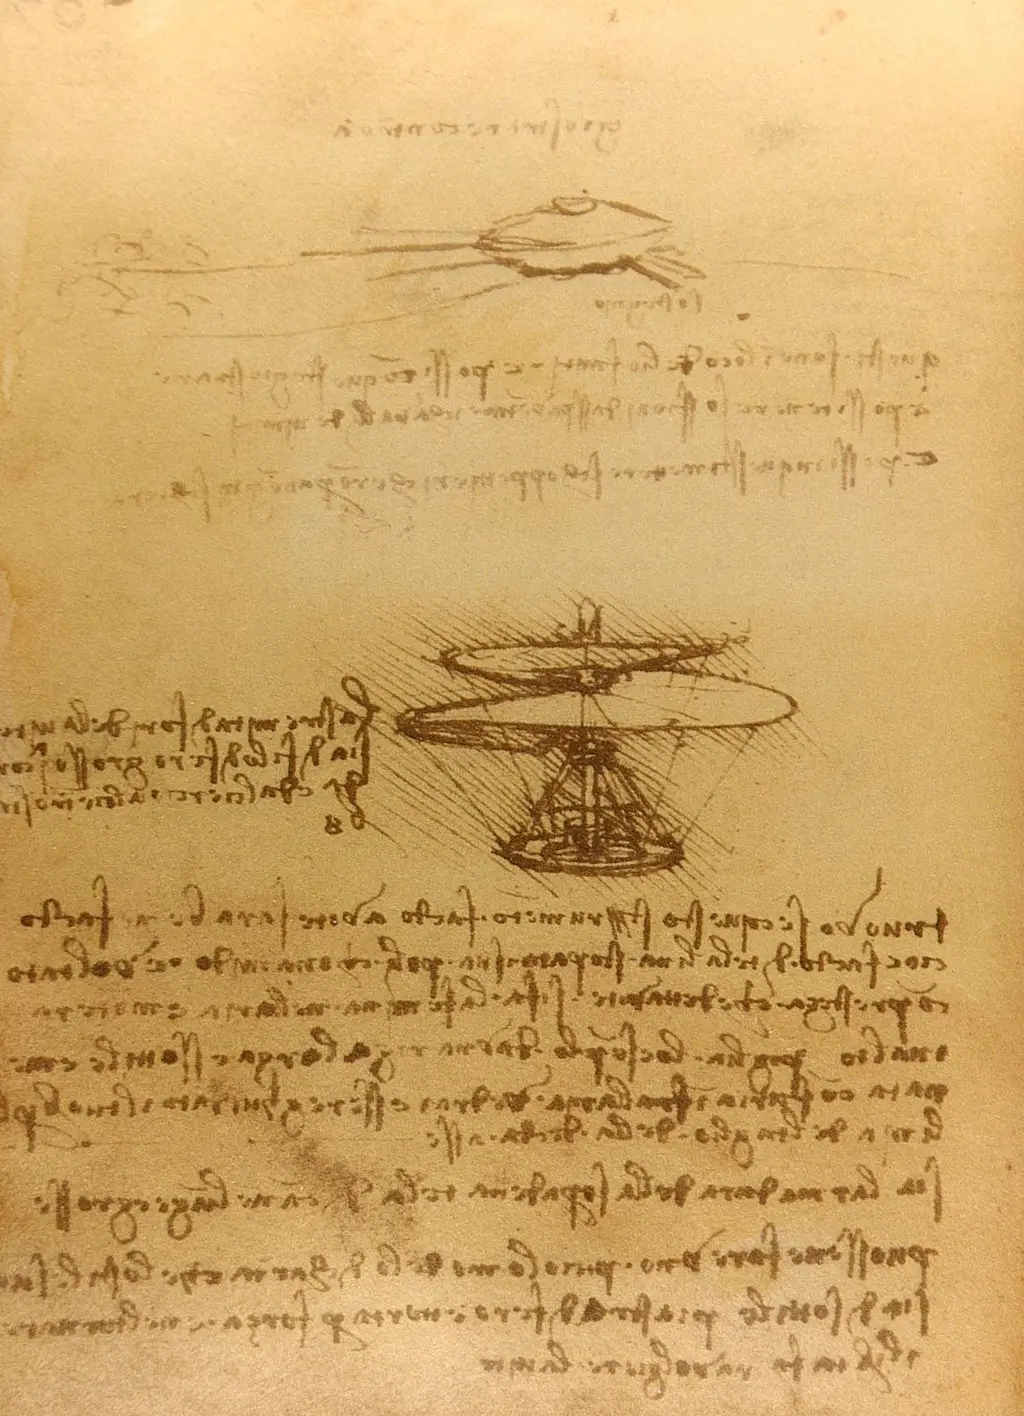 Da Vinci's Drawings of Helicopters